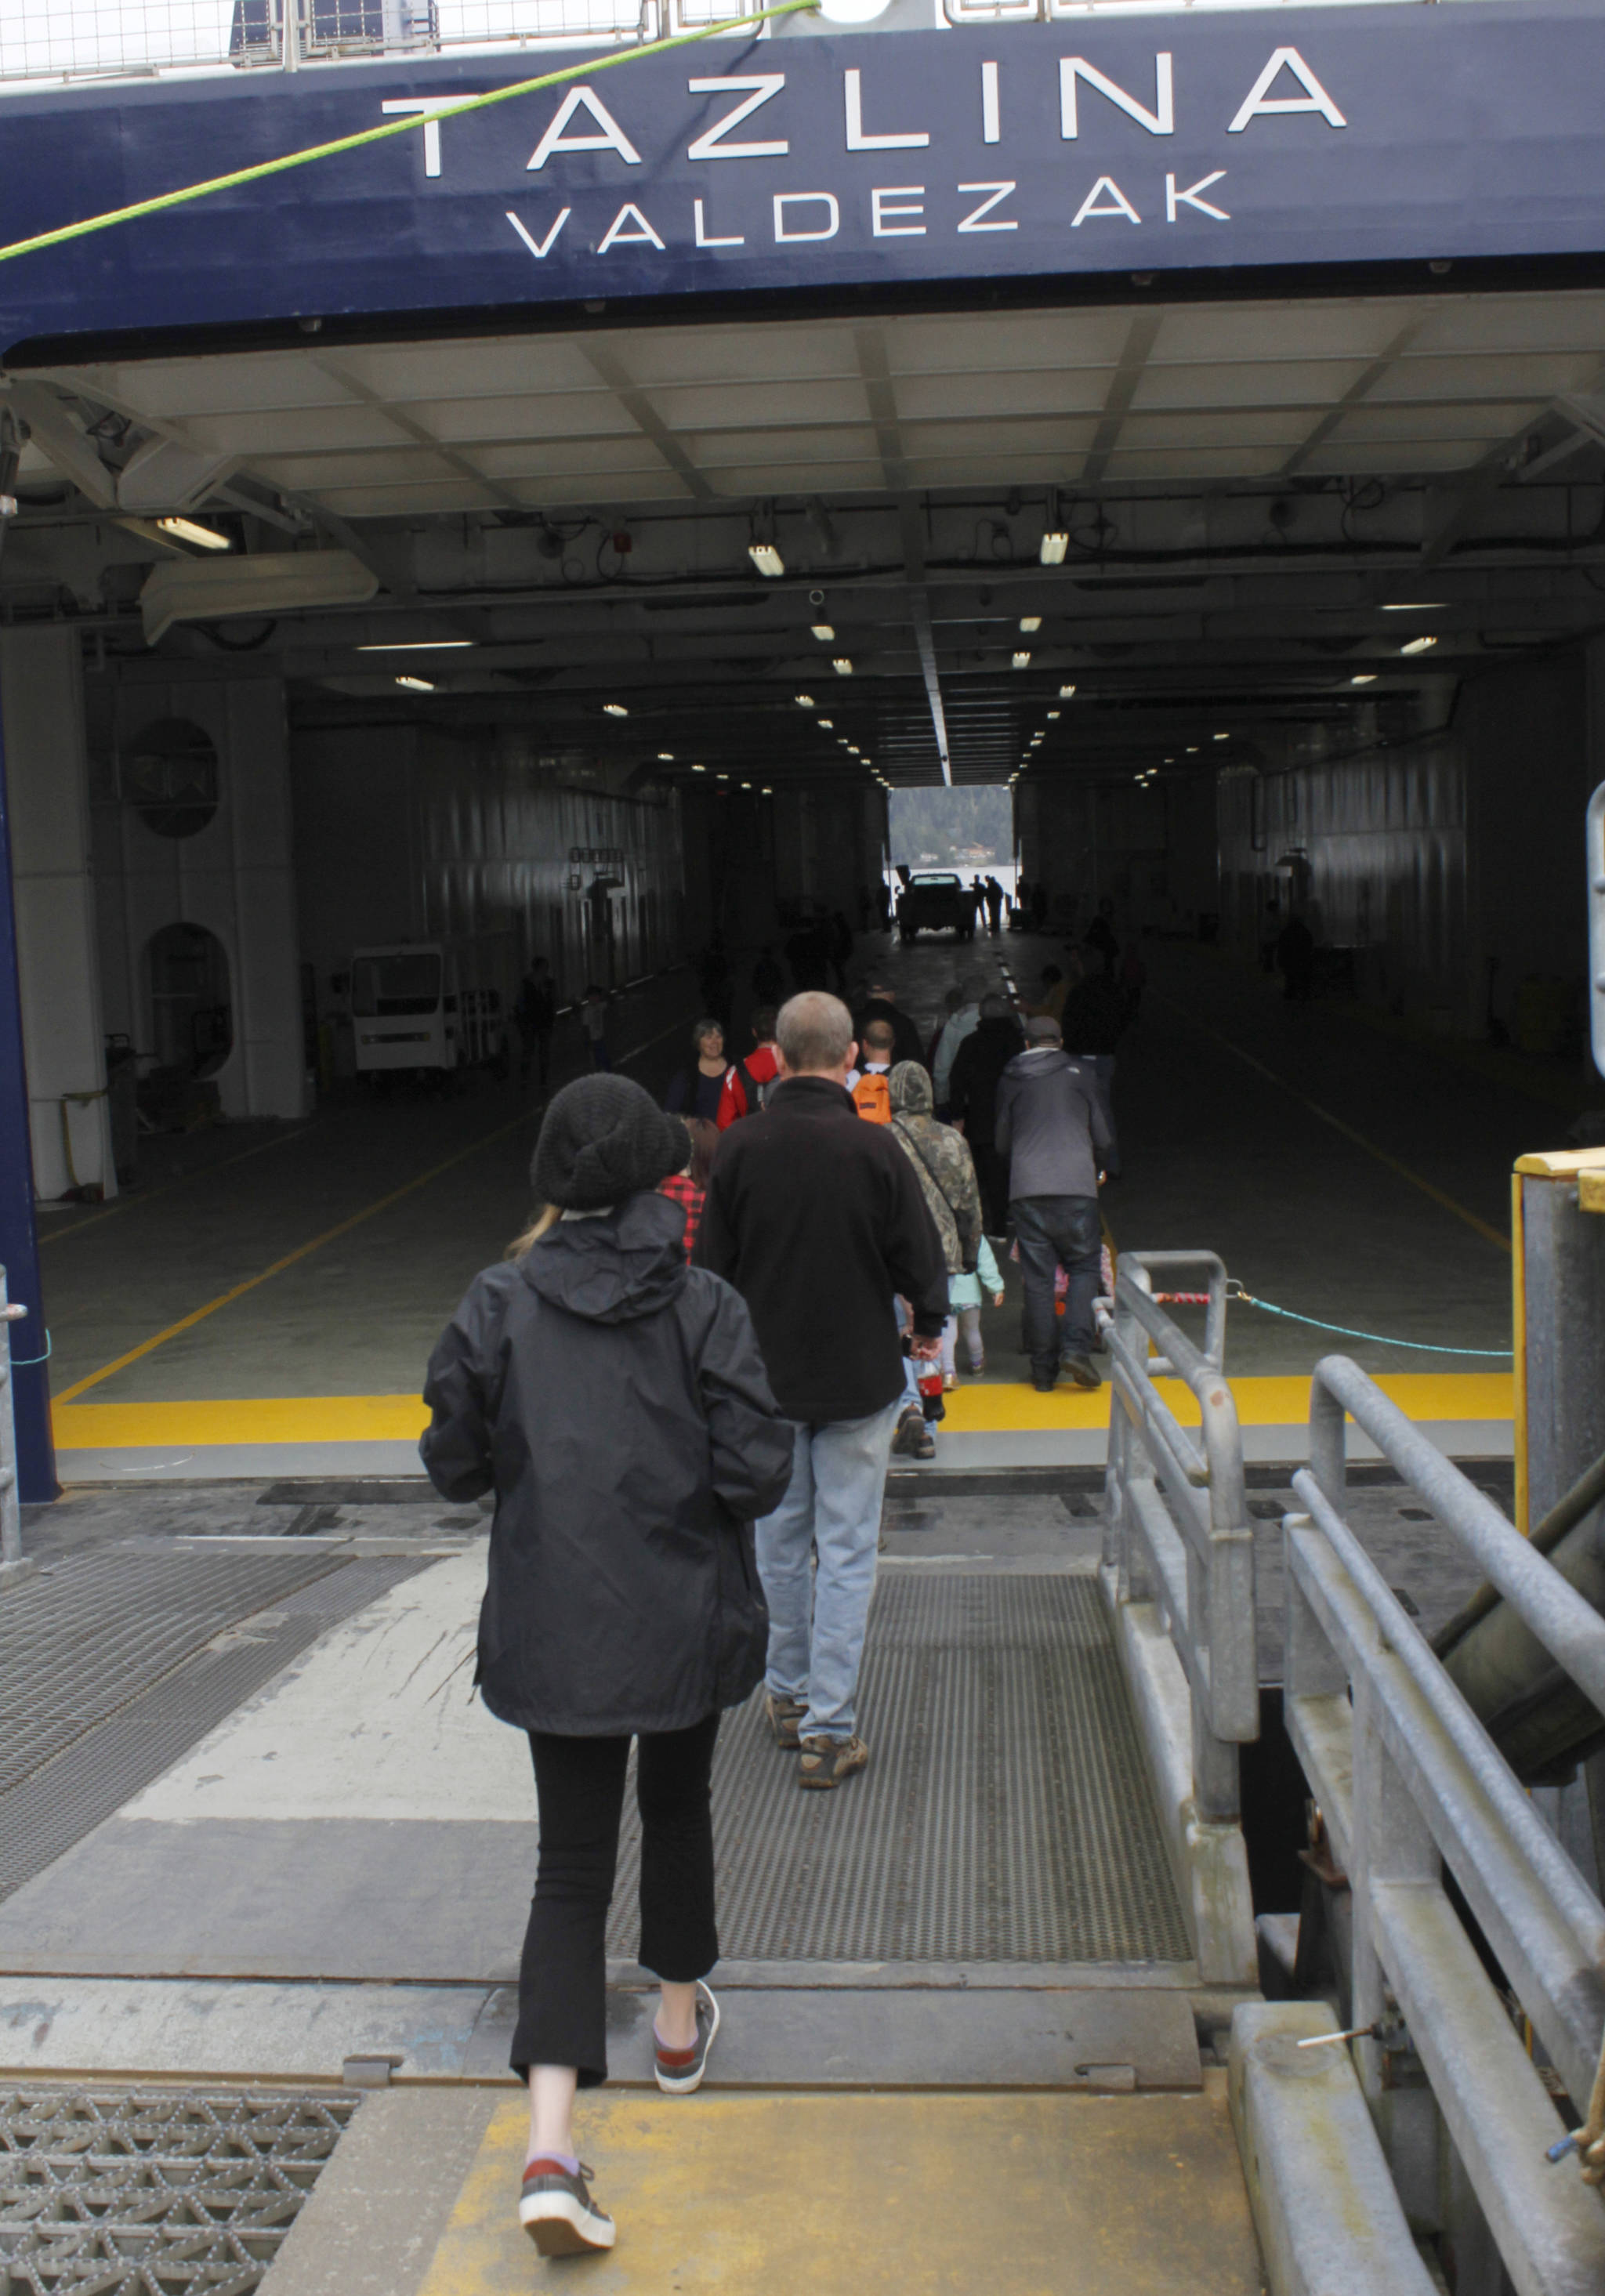 Members of the public walk onto the ferry Tazlina on Sunday, May 5, 2019. (Alex McCarthy | Juneau Empire)